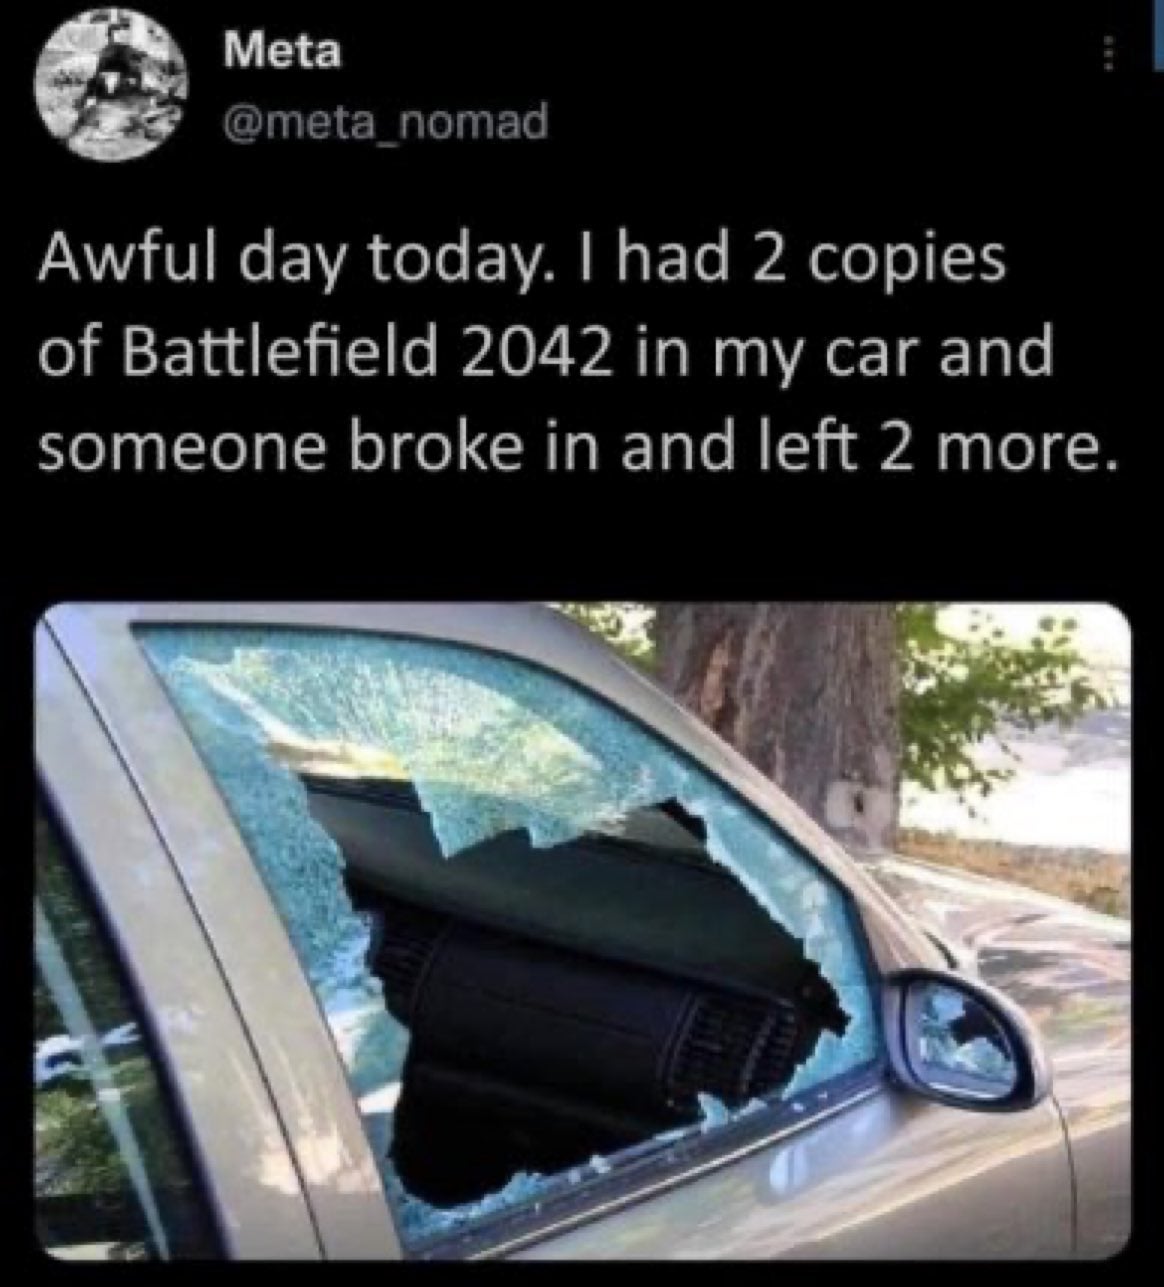 someone broke into my car and left tickets - . 64 Meta Awful day today. I had 2 copies of Battlefield 2042 in my car and someone broke in and left 2 more.